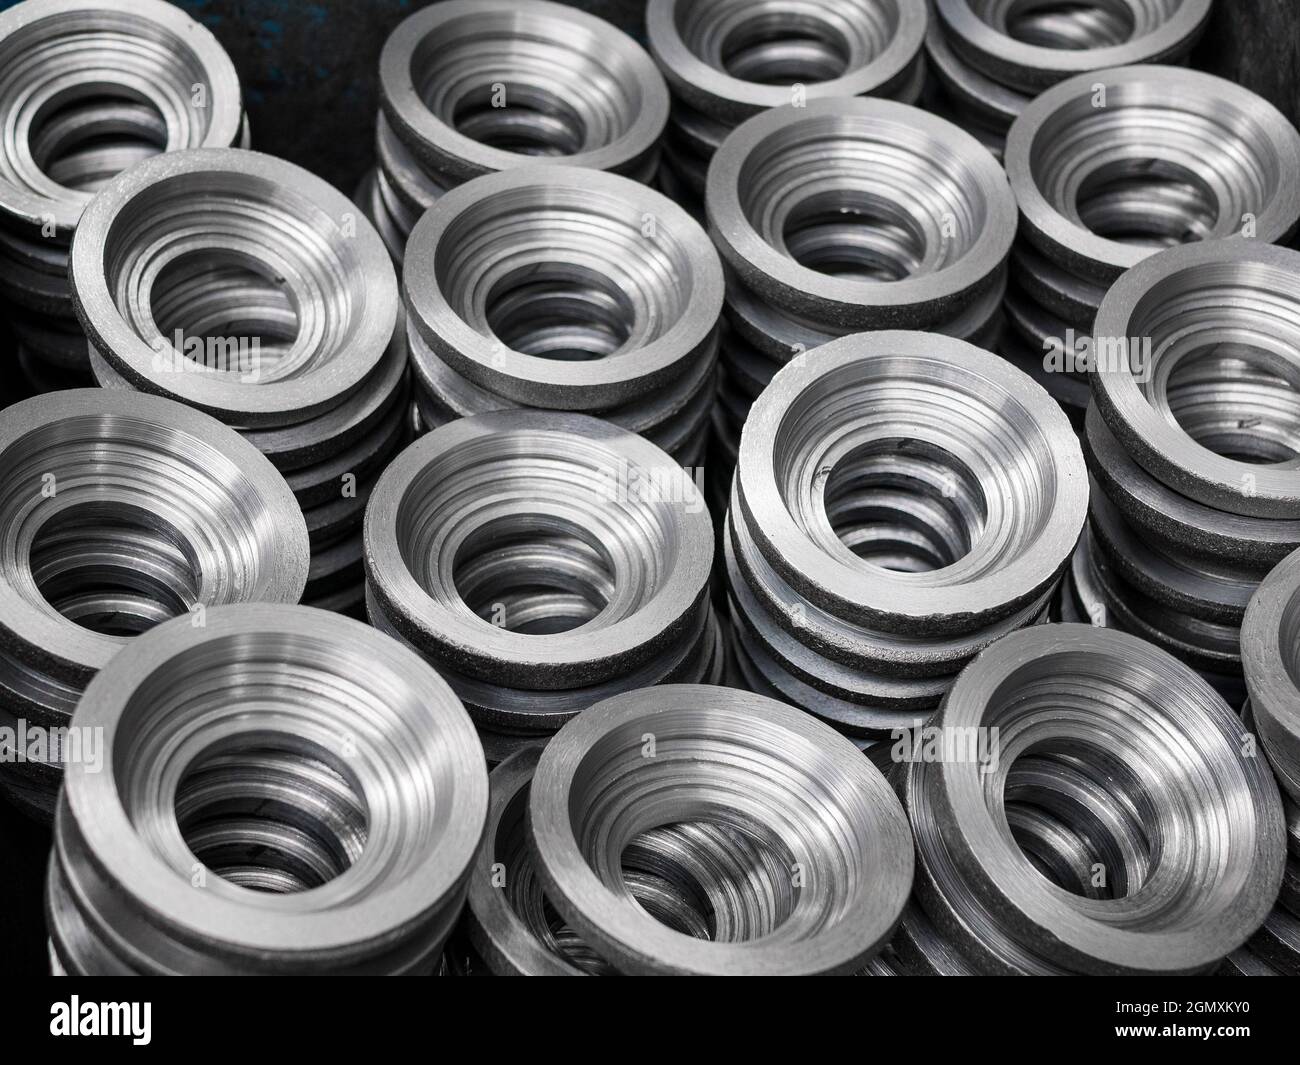 Piles of the gear blanks with bore, close up. Manufacturing of cylindrical gears Stock Photo